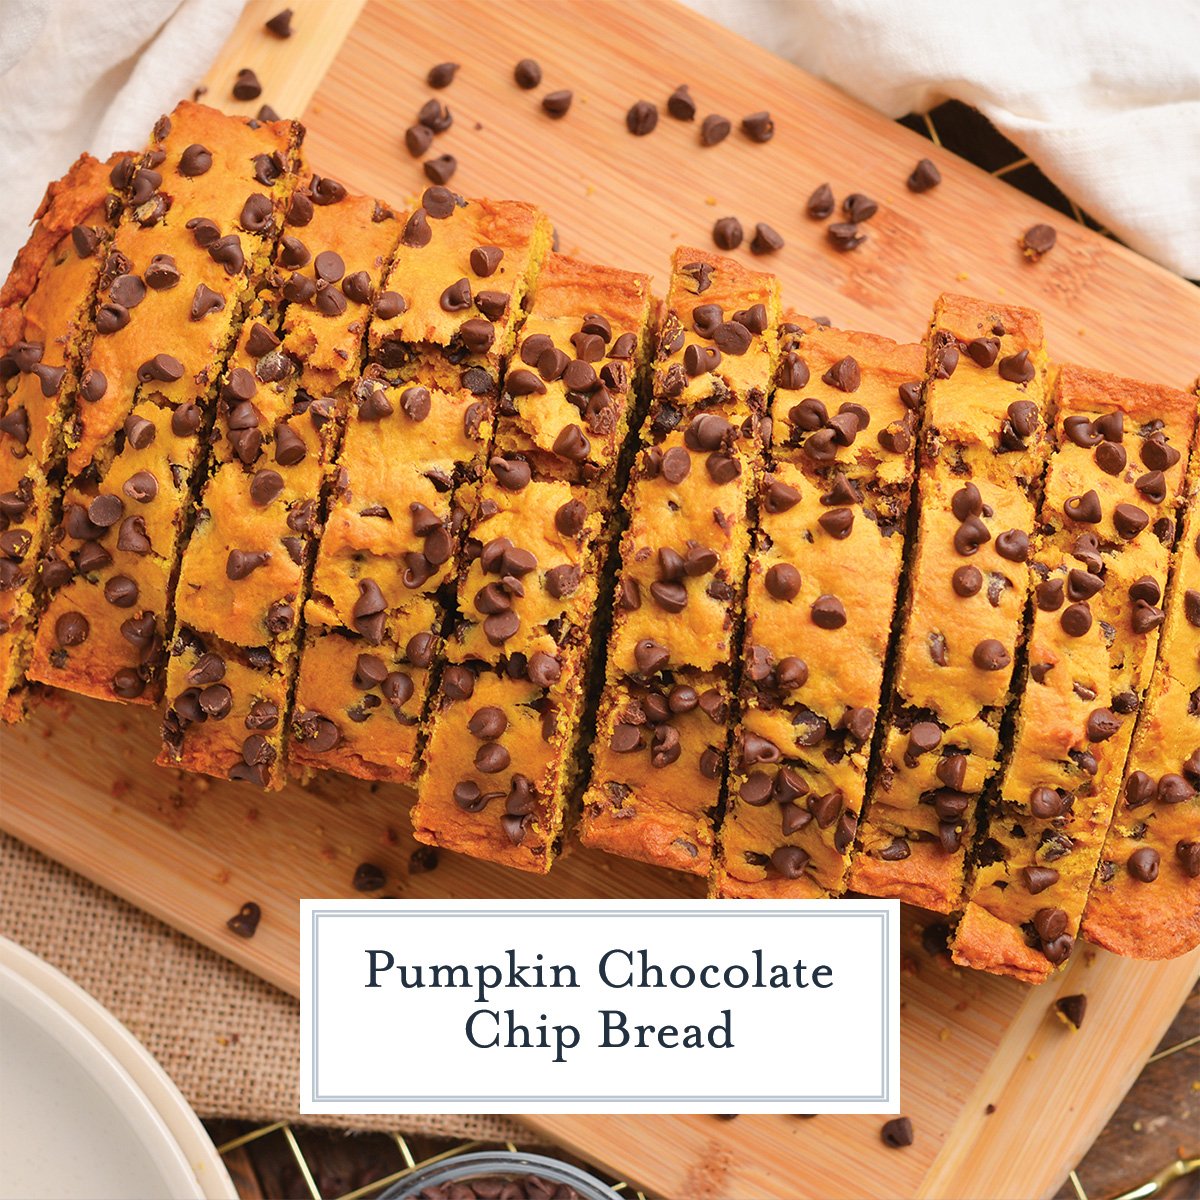 pumpkin chocolate chip bread with text overlay